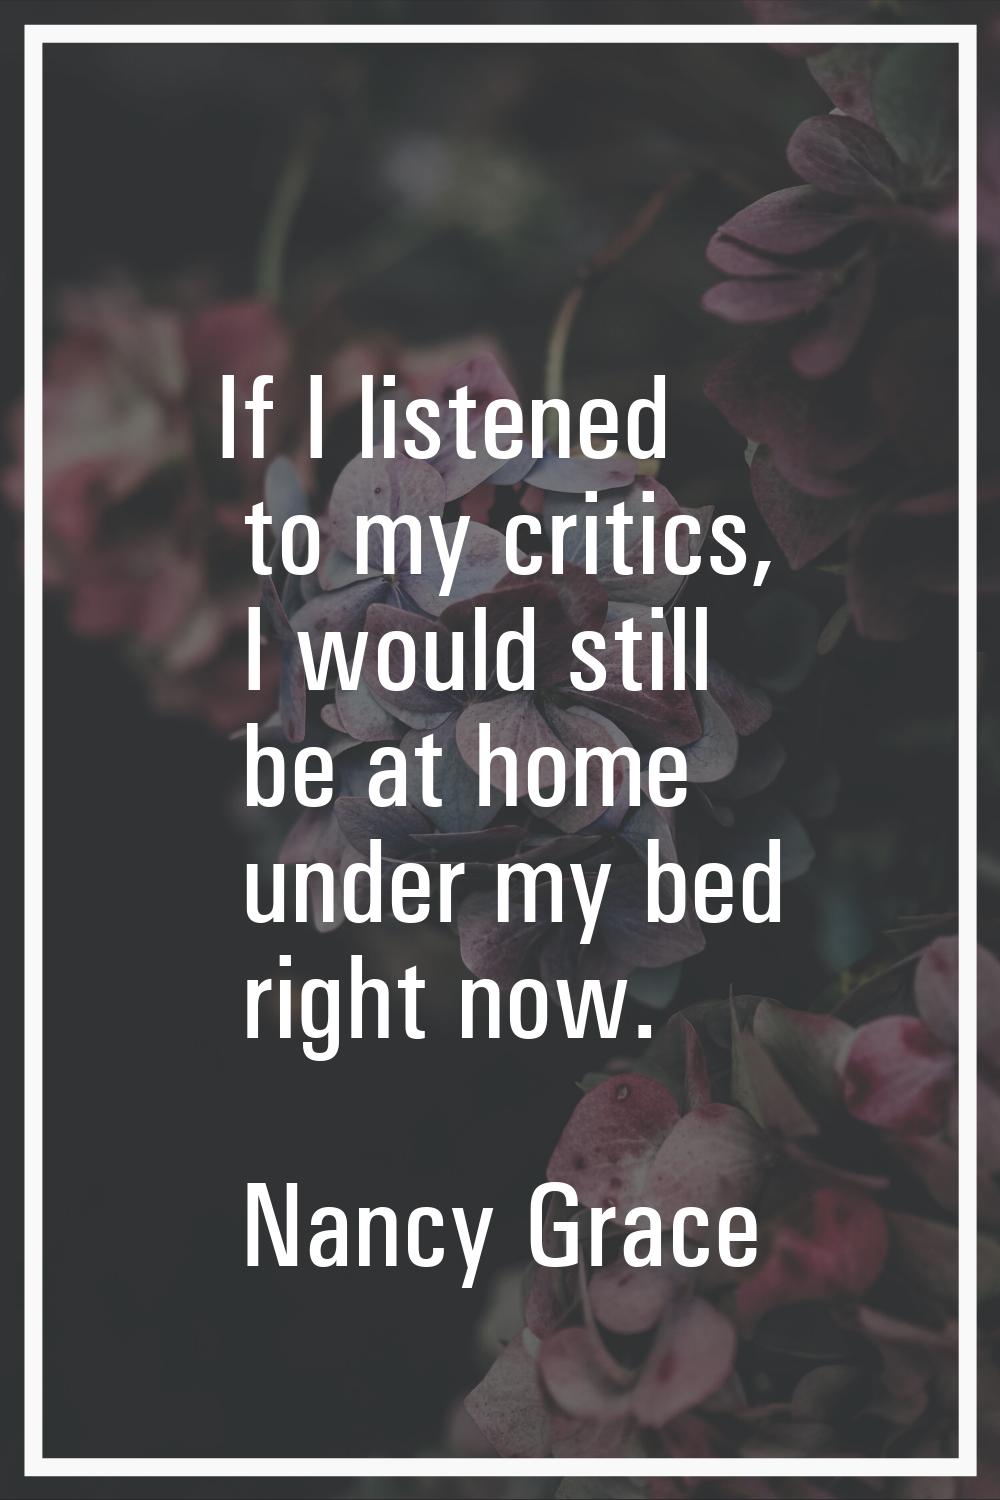 If I listened to my critics, I would still be at home under my bed right now.